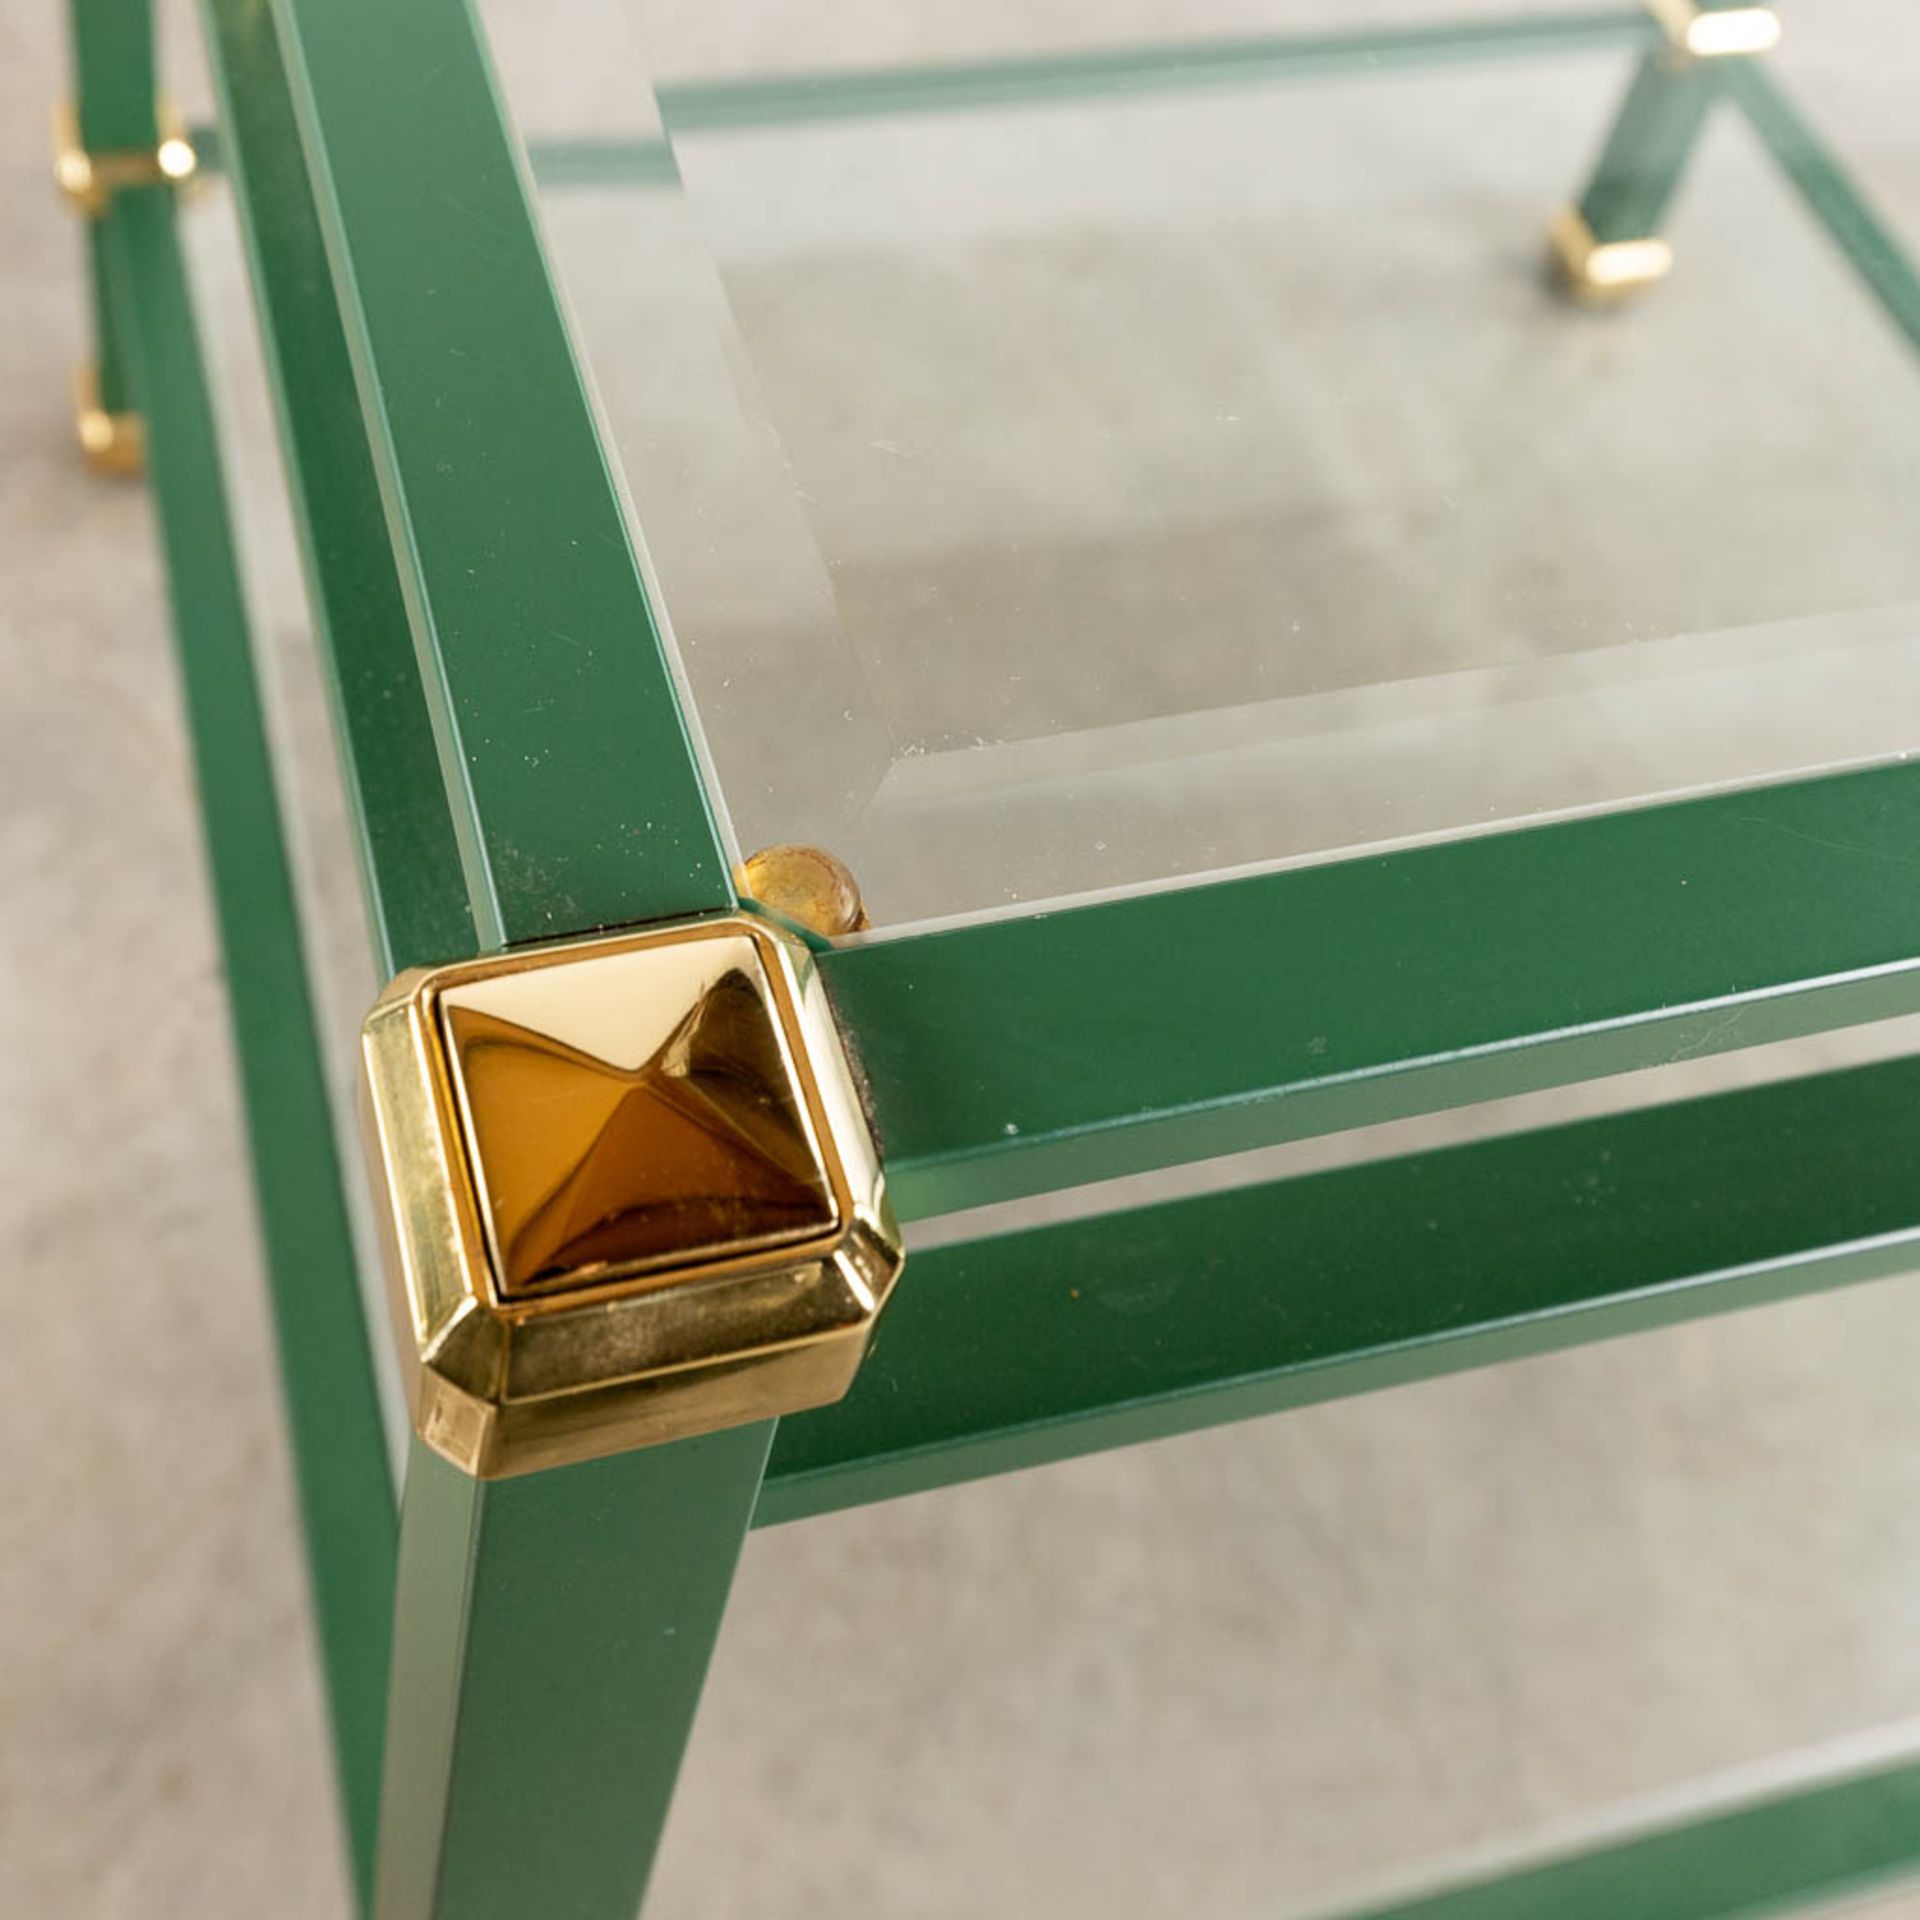 4 matching coffee and side tables, lacquered metal and glass, circa 1980. (L:58 x W:118 x H:46 cm) - Bild 13 aus 13